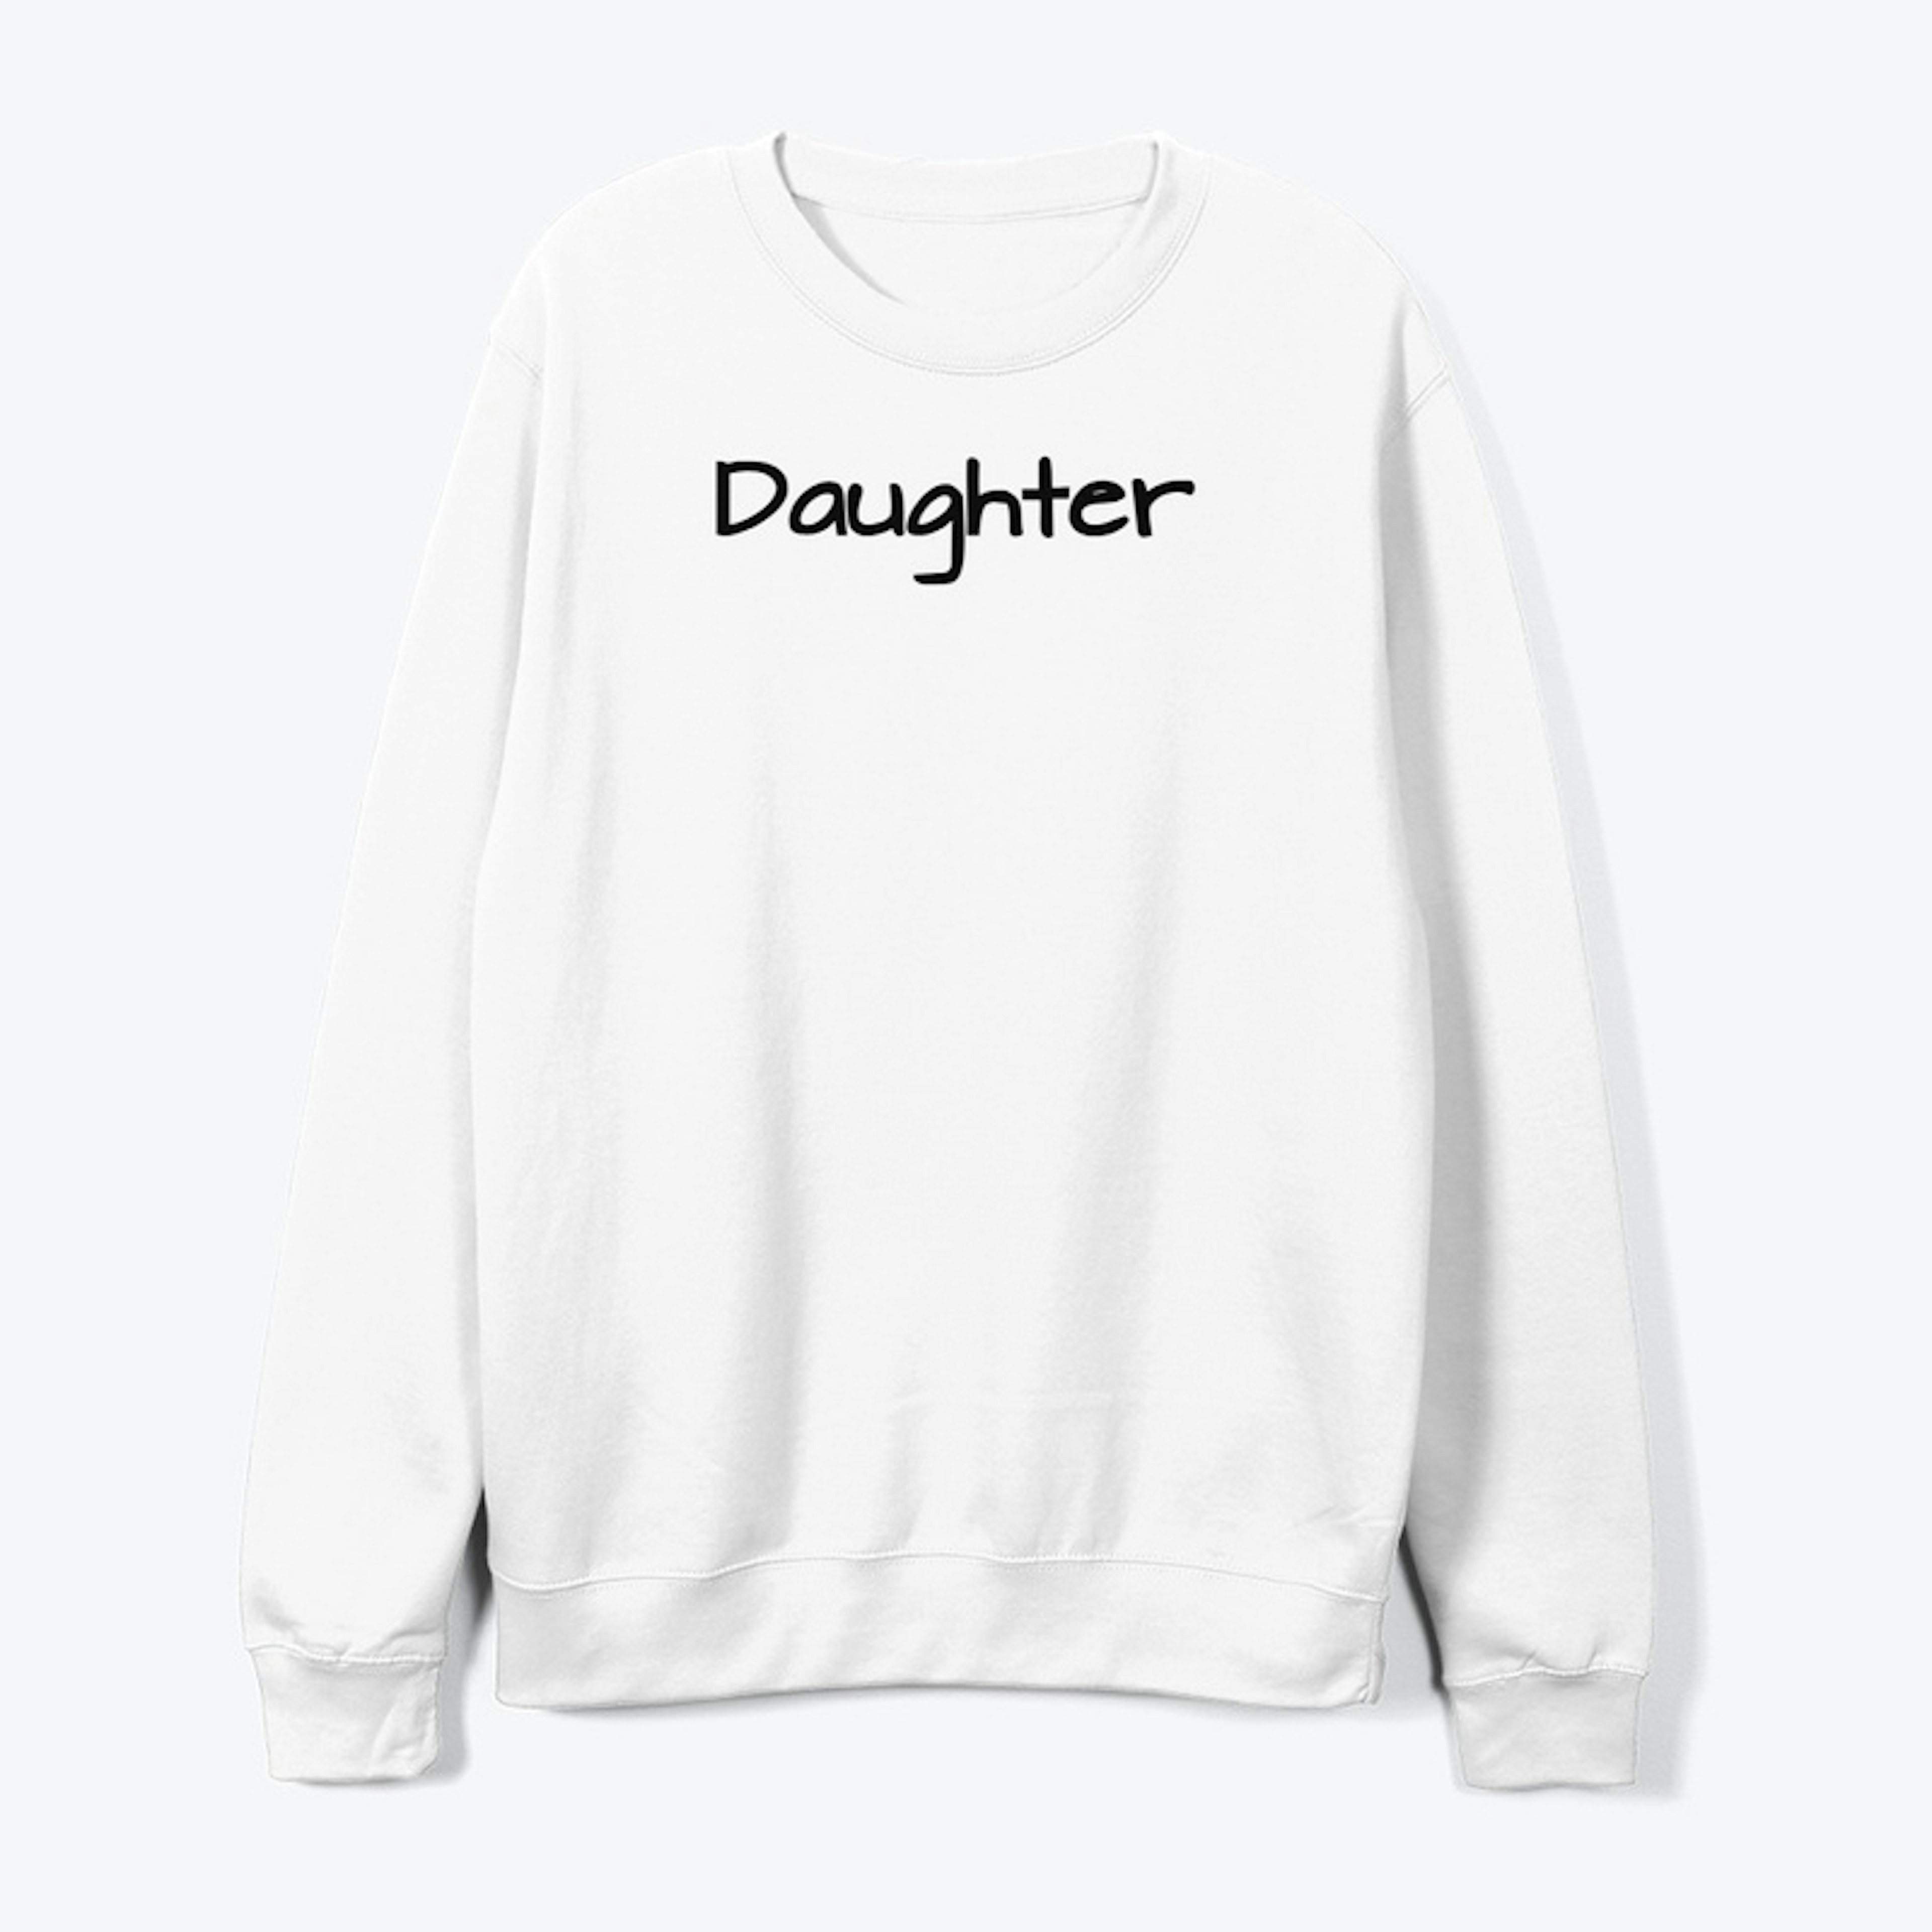 A Daughter is